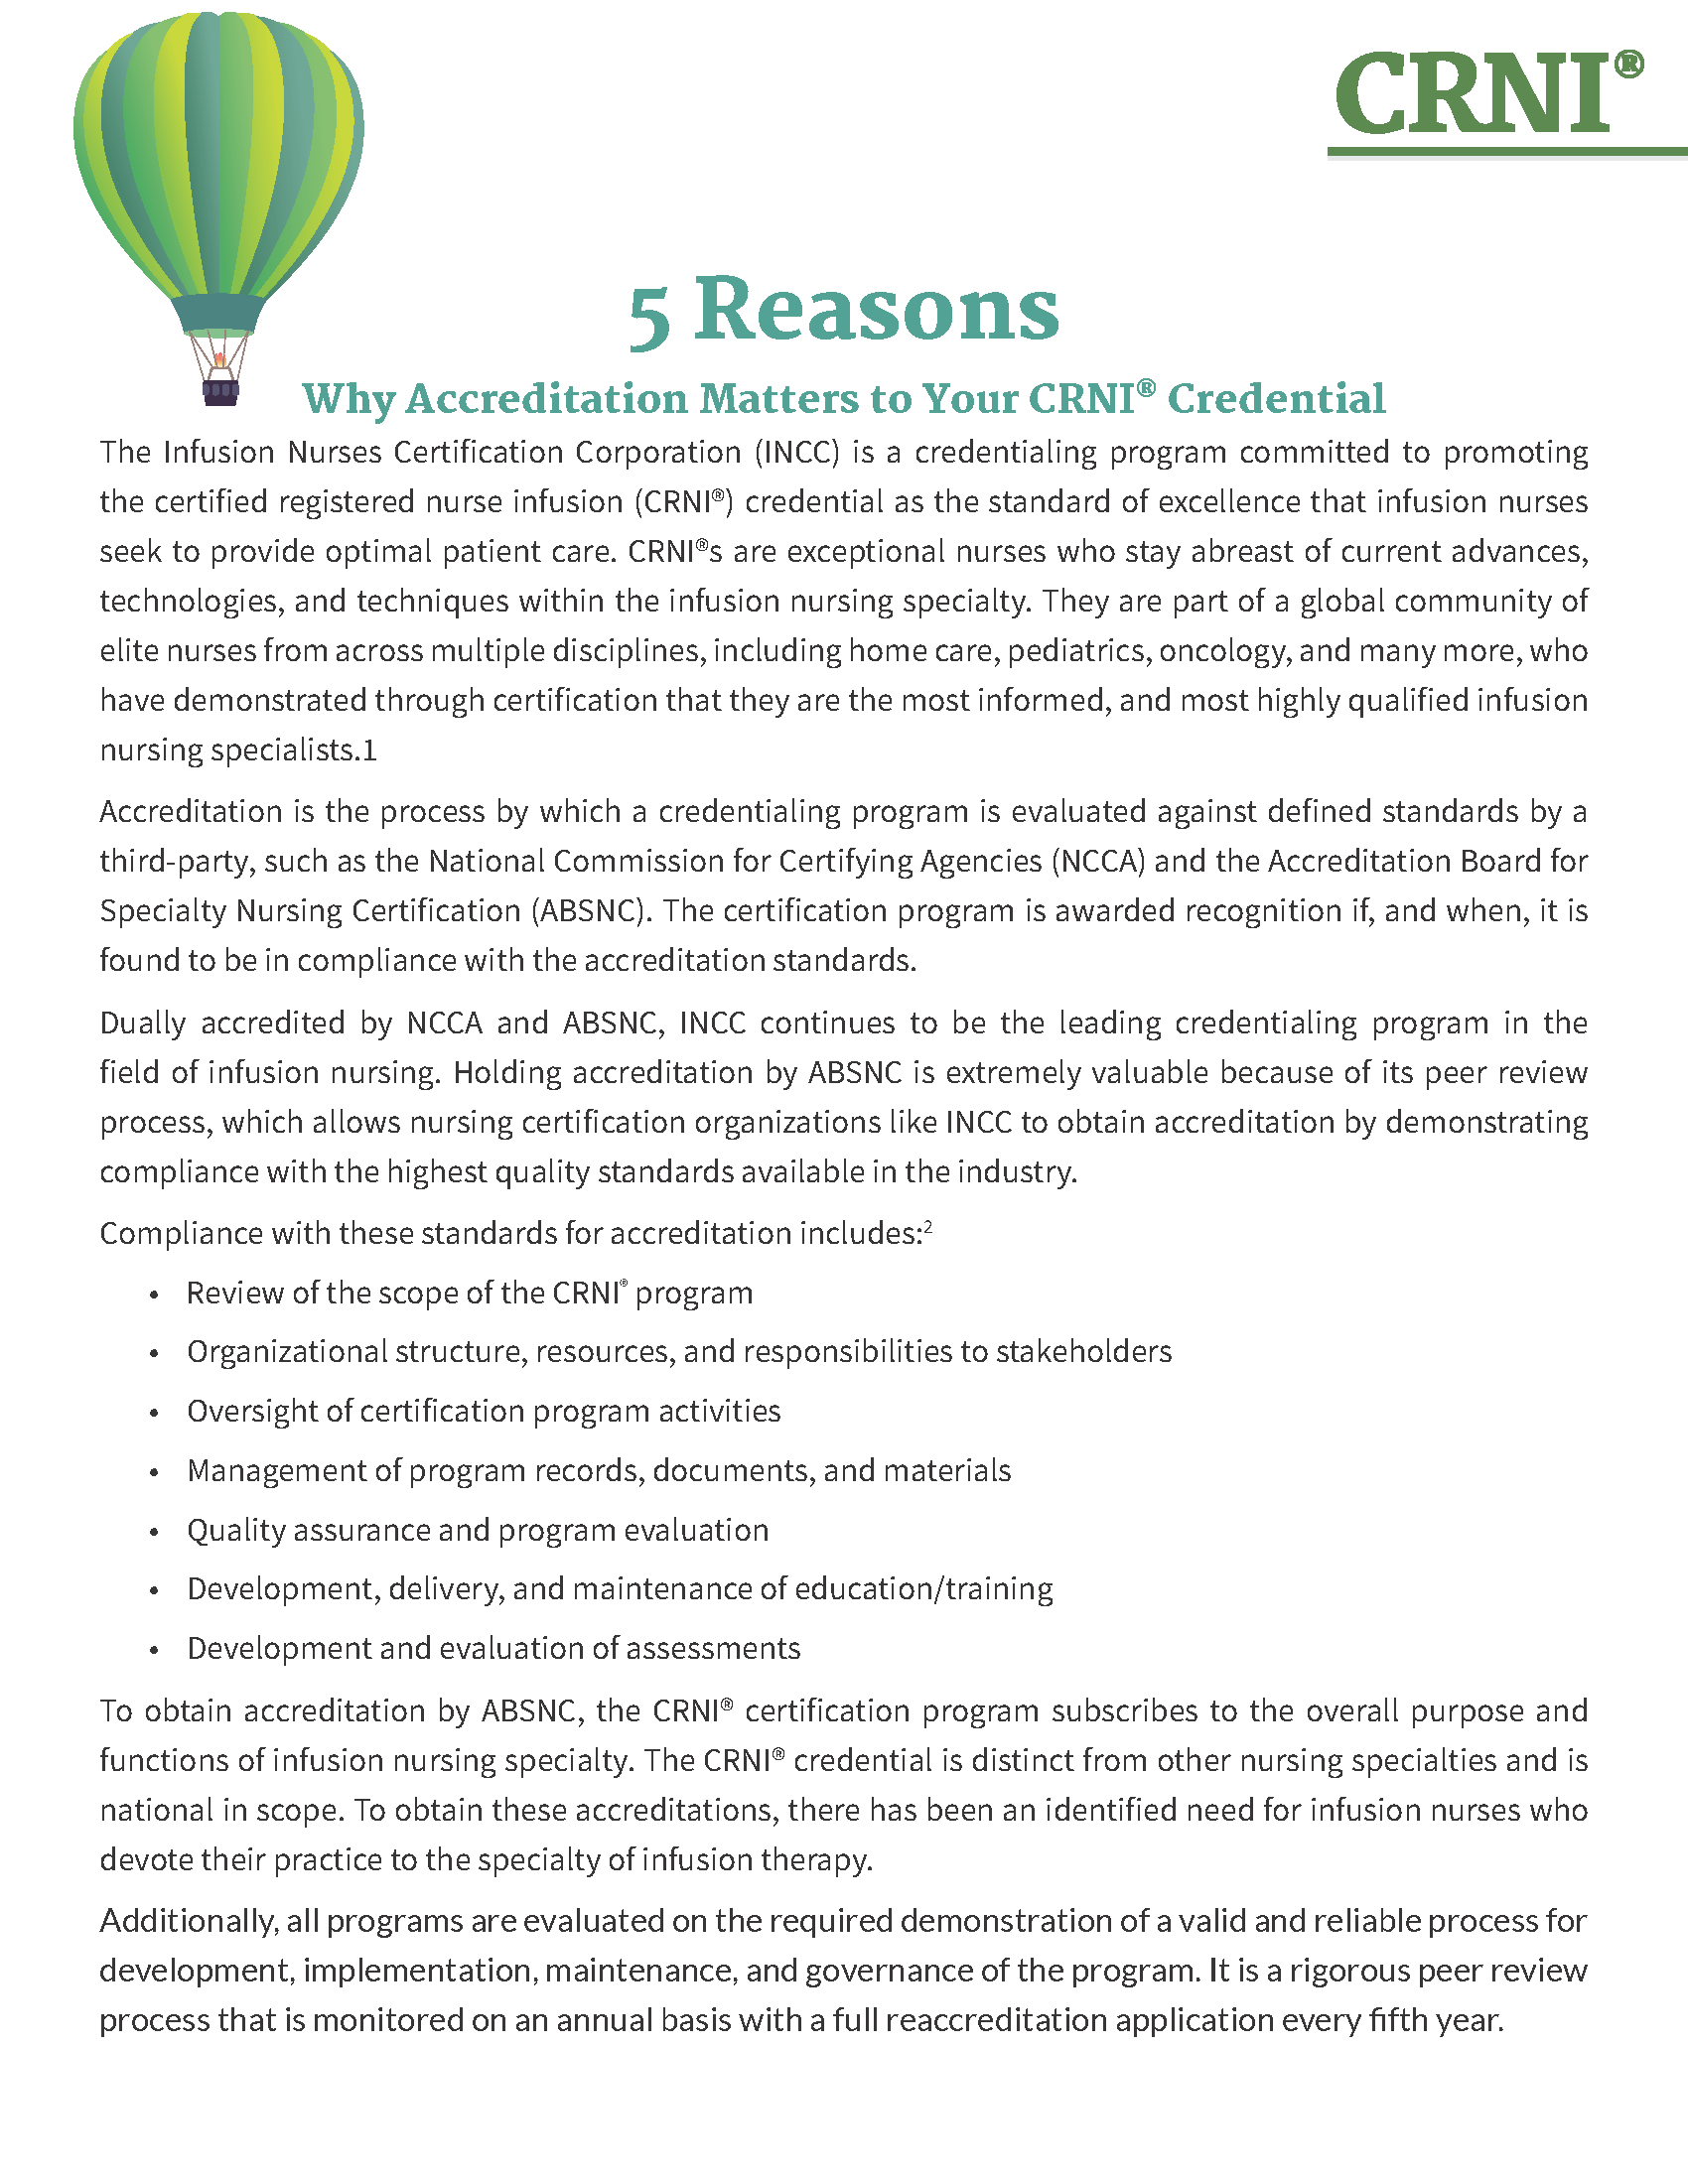 5 Reasons Why Accreditation Matters to Your CRNI® Credential